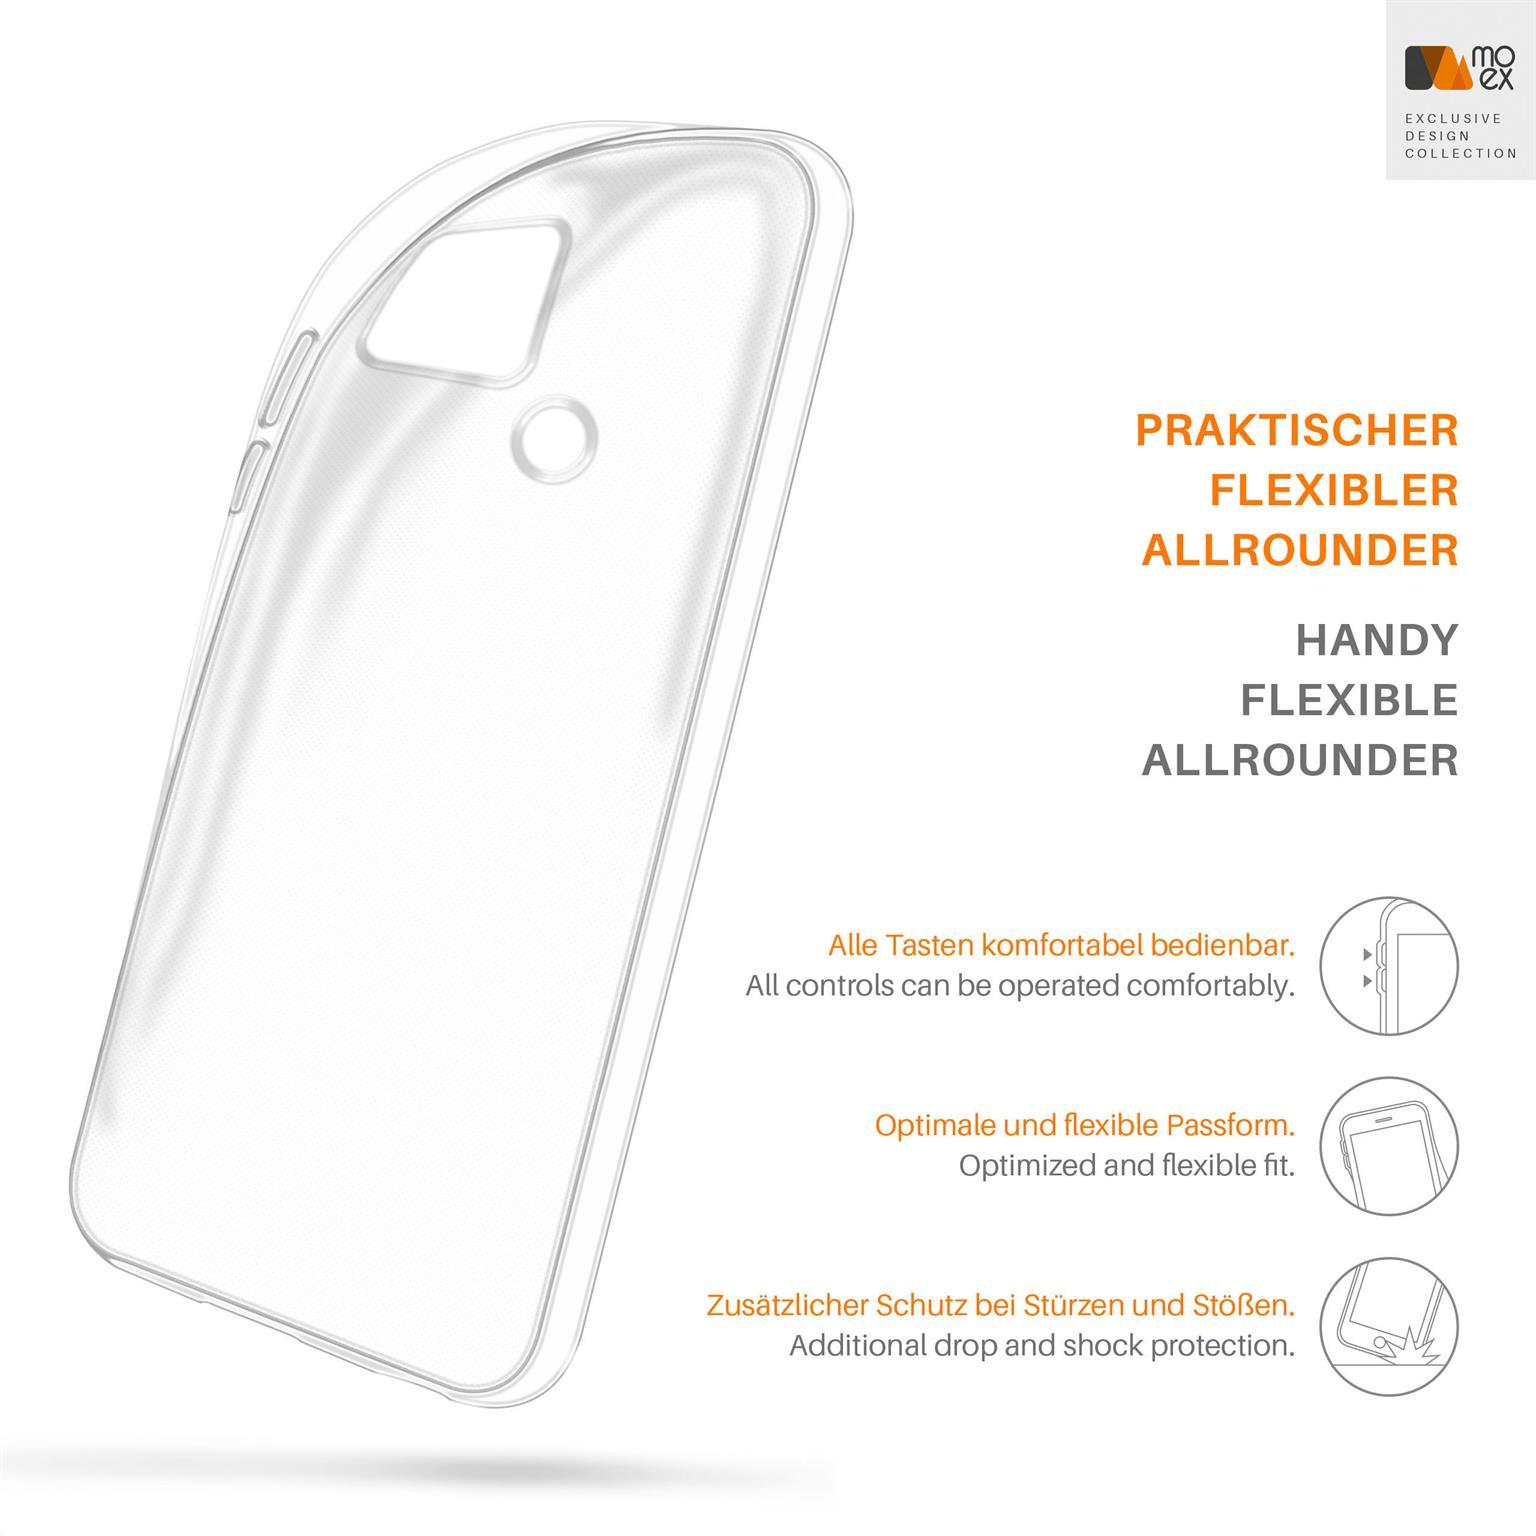 MOEX Aero Case, Backcover, Oppo, Crystal-Clear A15